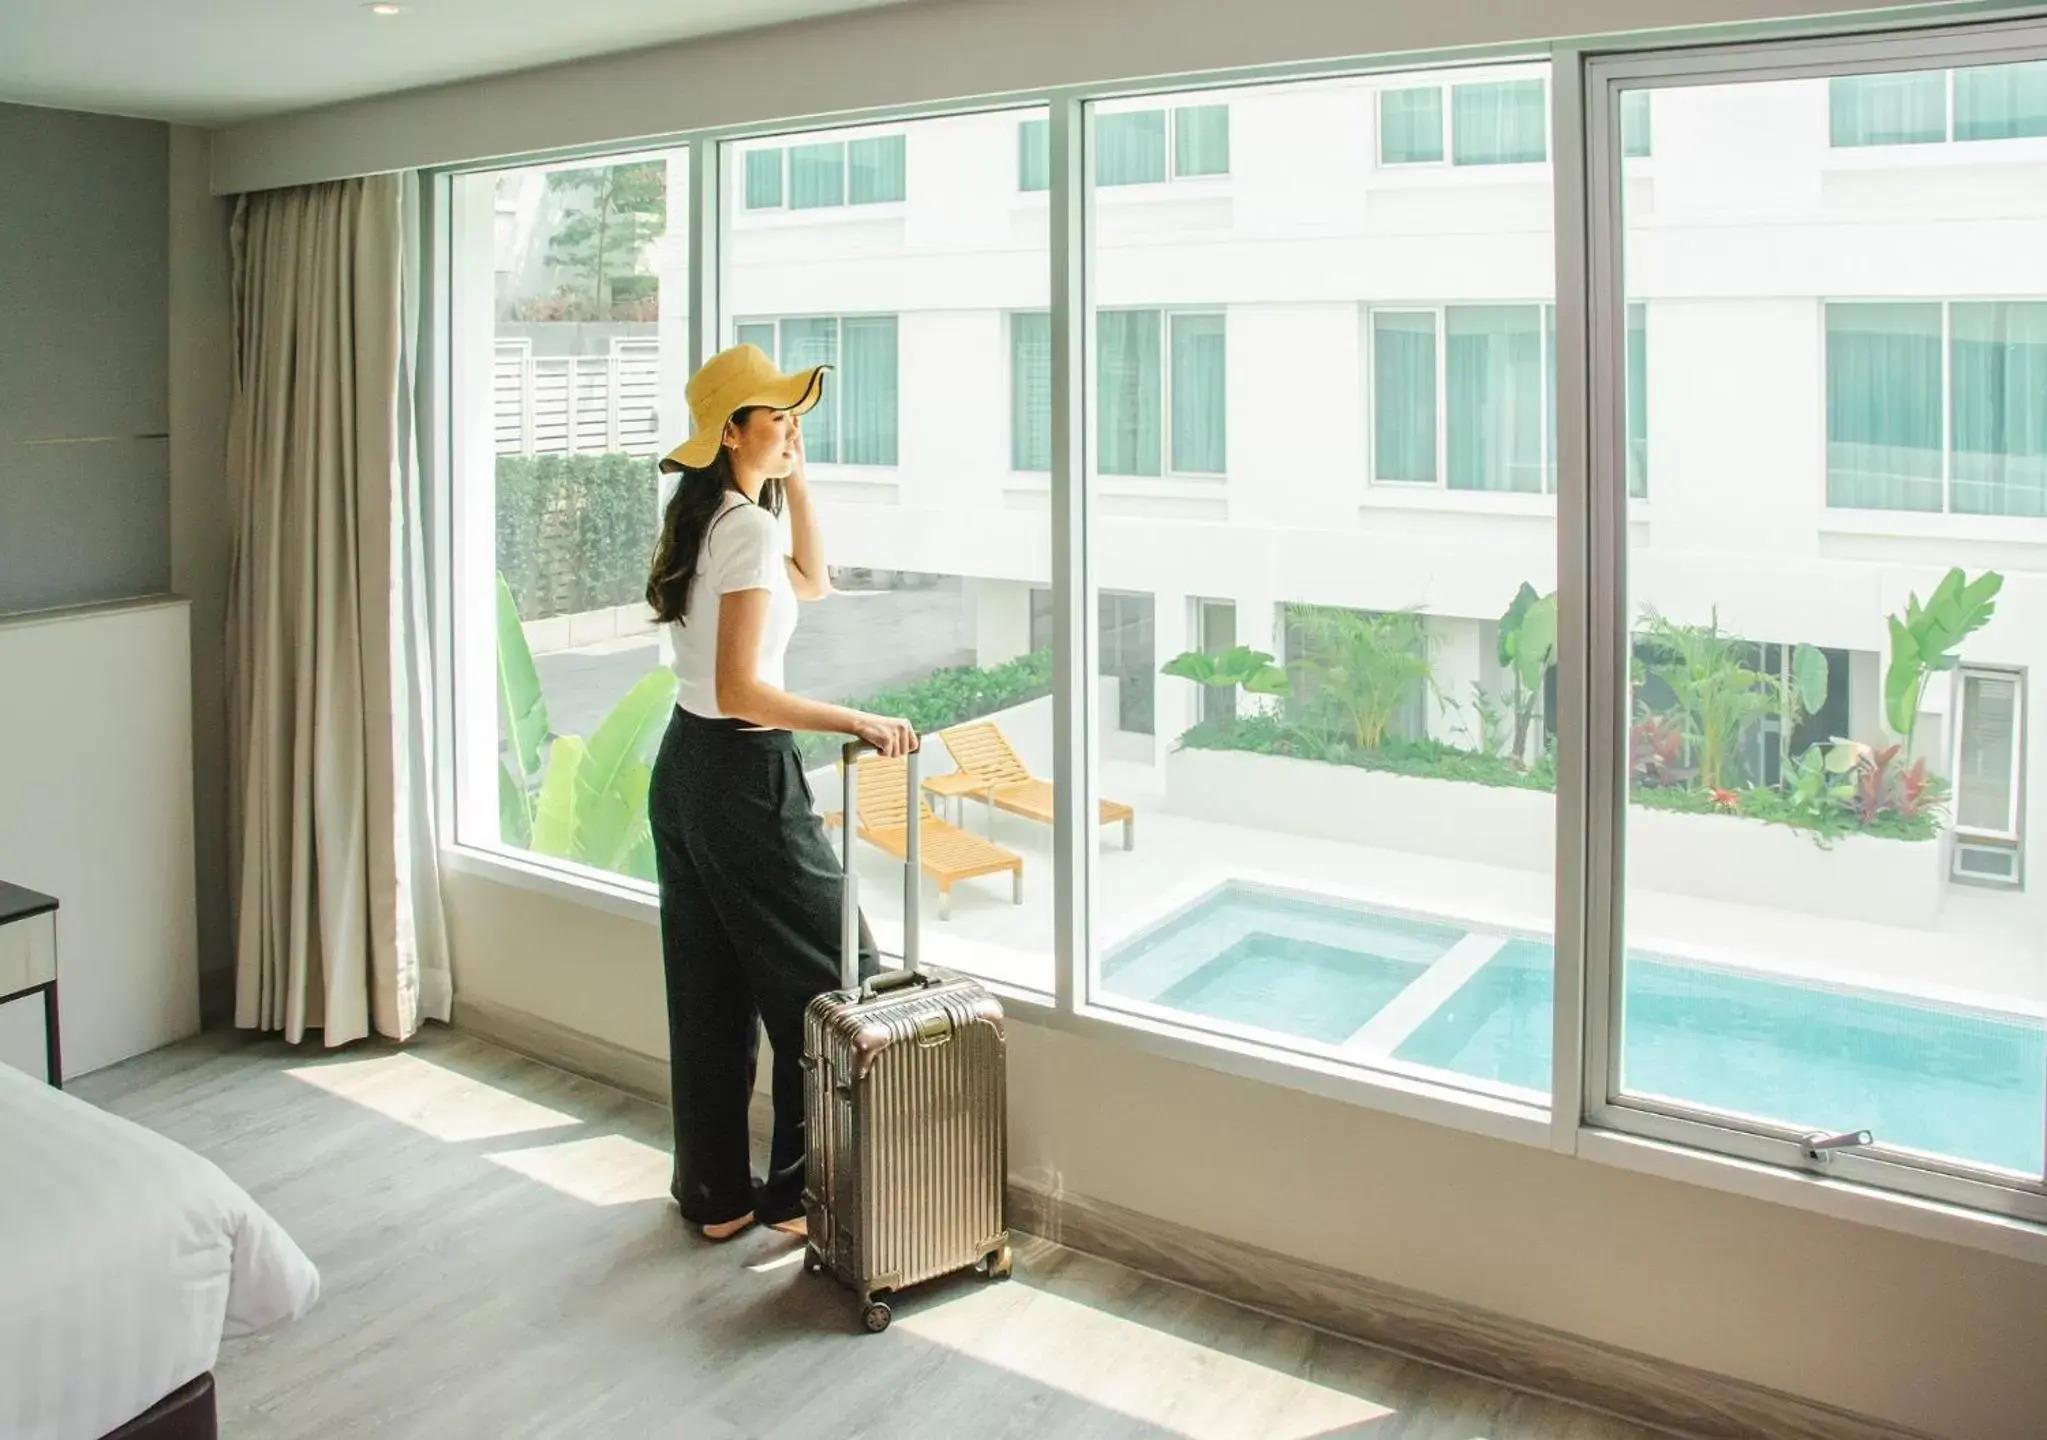 View (from property/room) in Centre Point Sukhumvit 10 - SHA Extra Plus